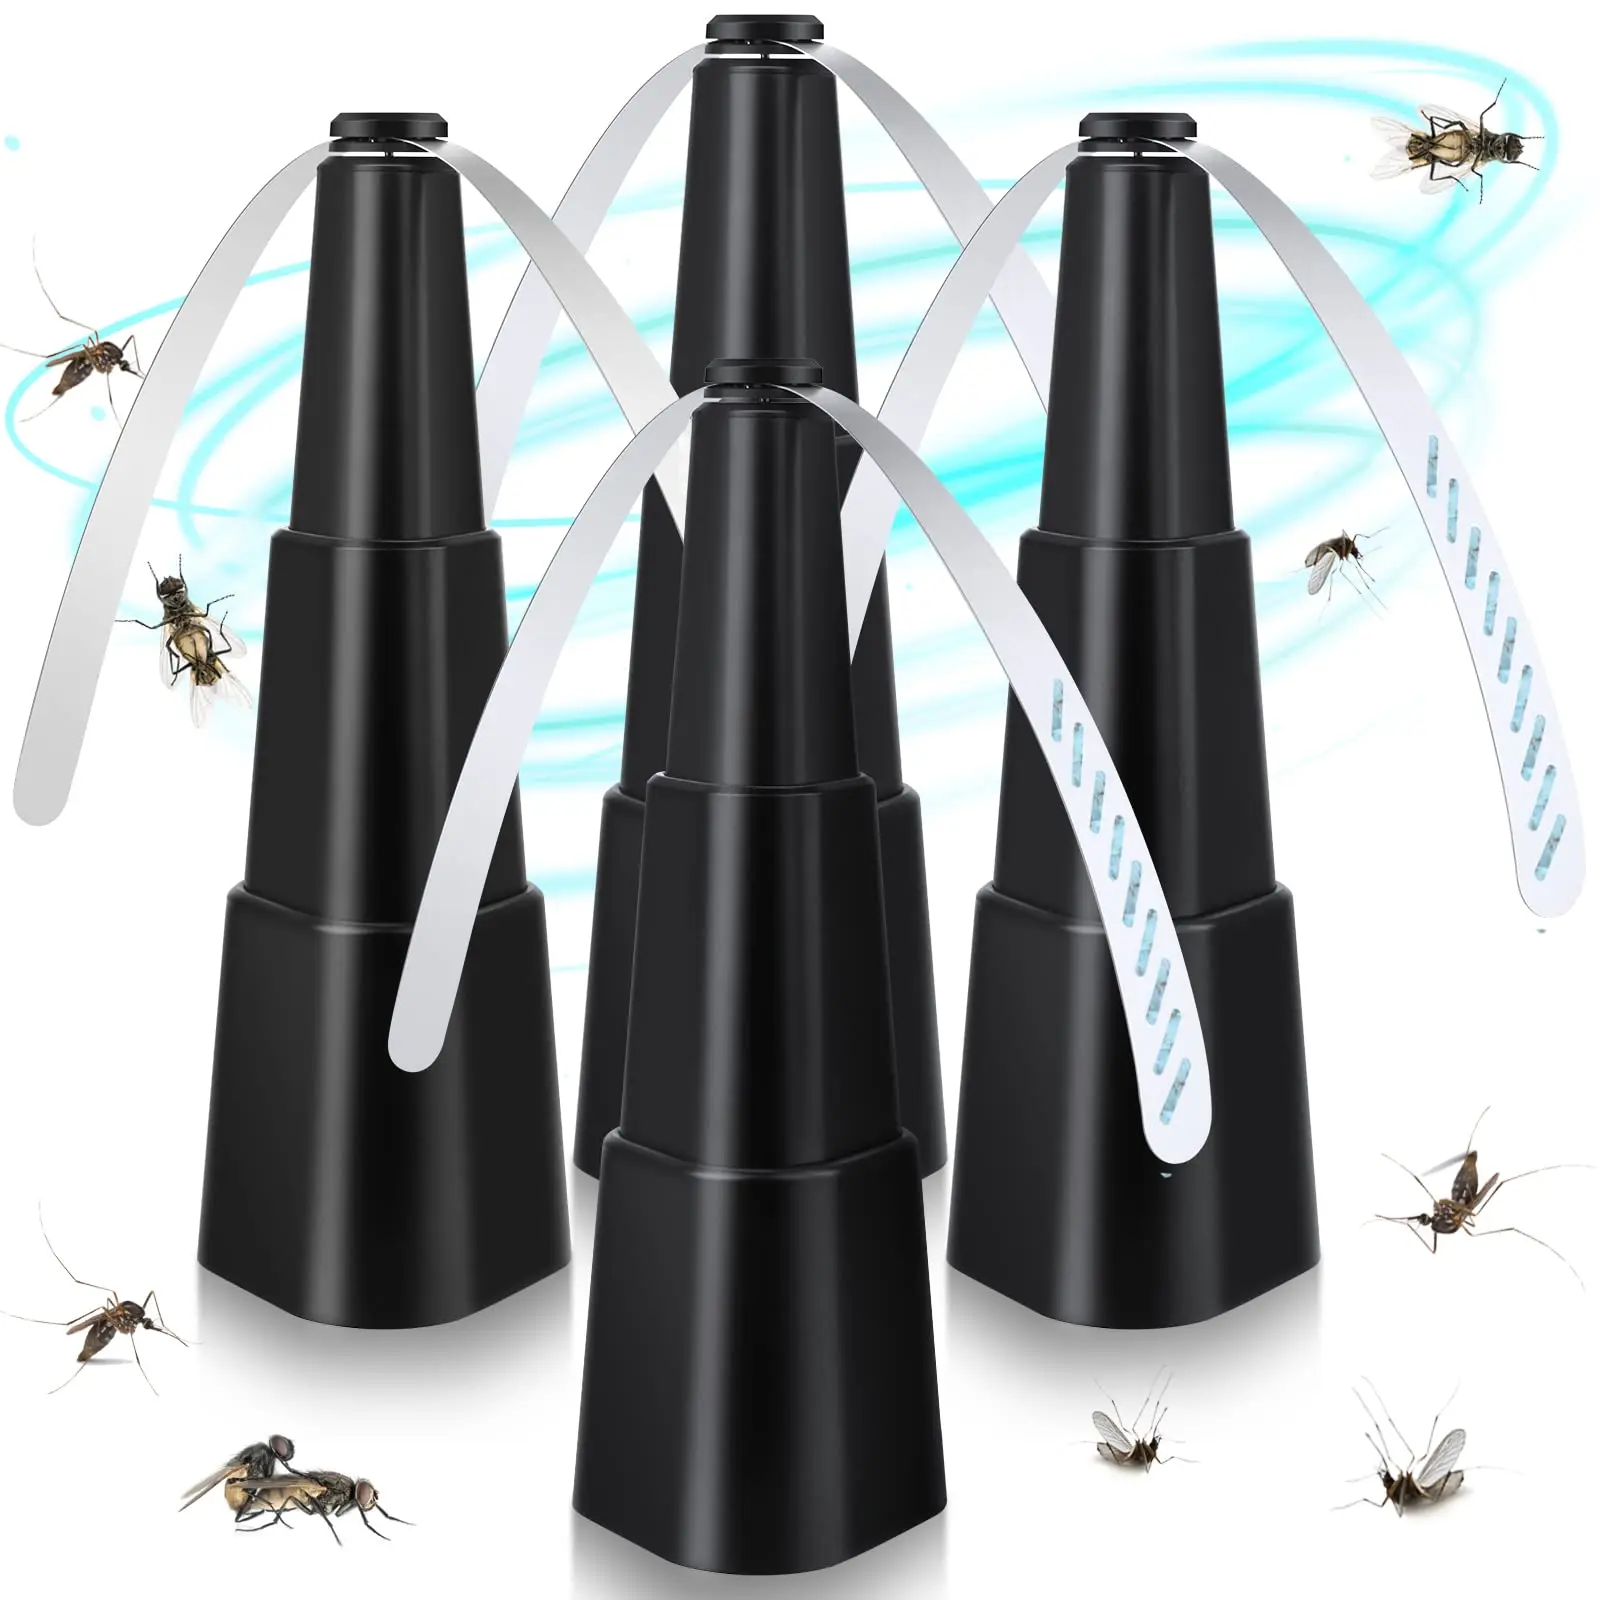 Fly Fans for Tables Fly Repellent Fan Indoor Outdoor with Holographic Blades Keep Flies Away Bug Repellent Outdoor plastic handle burr metal nb1100 deburring tool handle remover cutting tool with 10pcs rotary deburr bs1010 blades debur